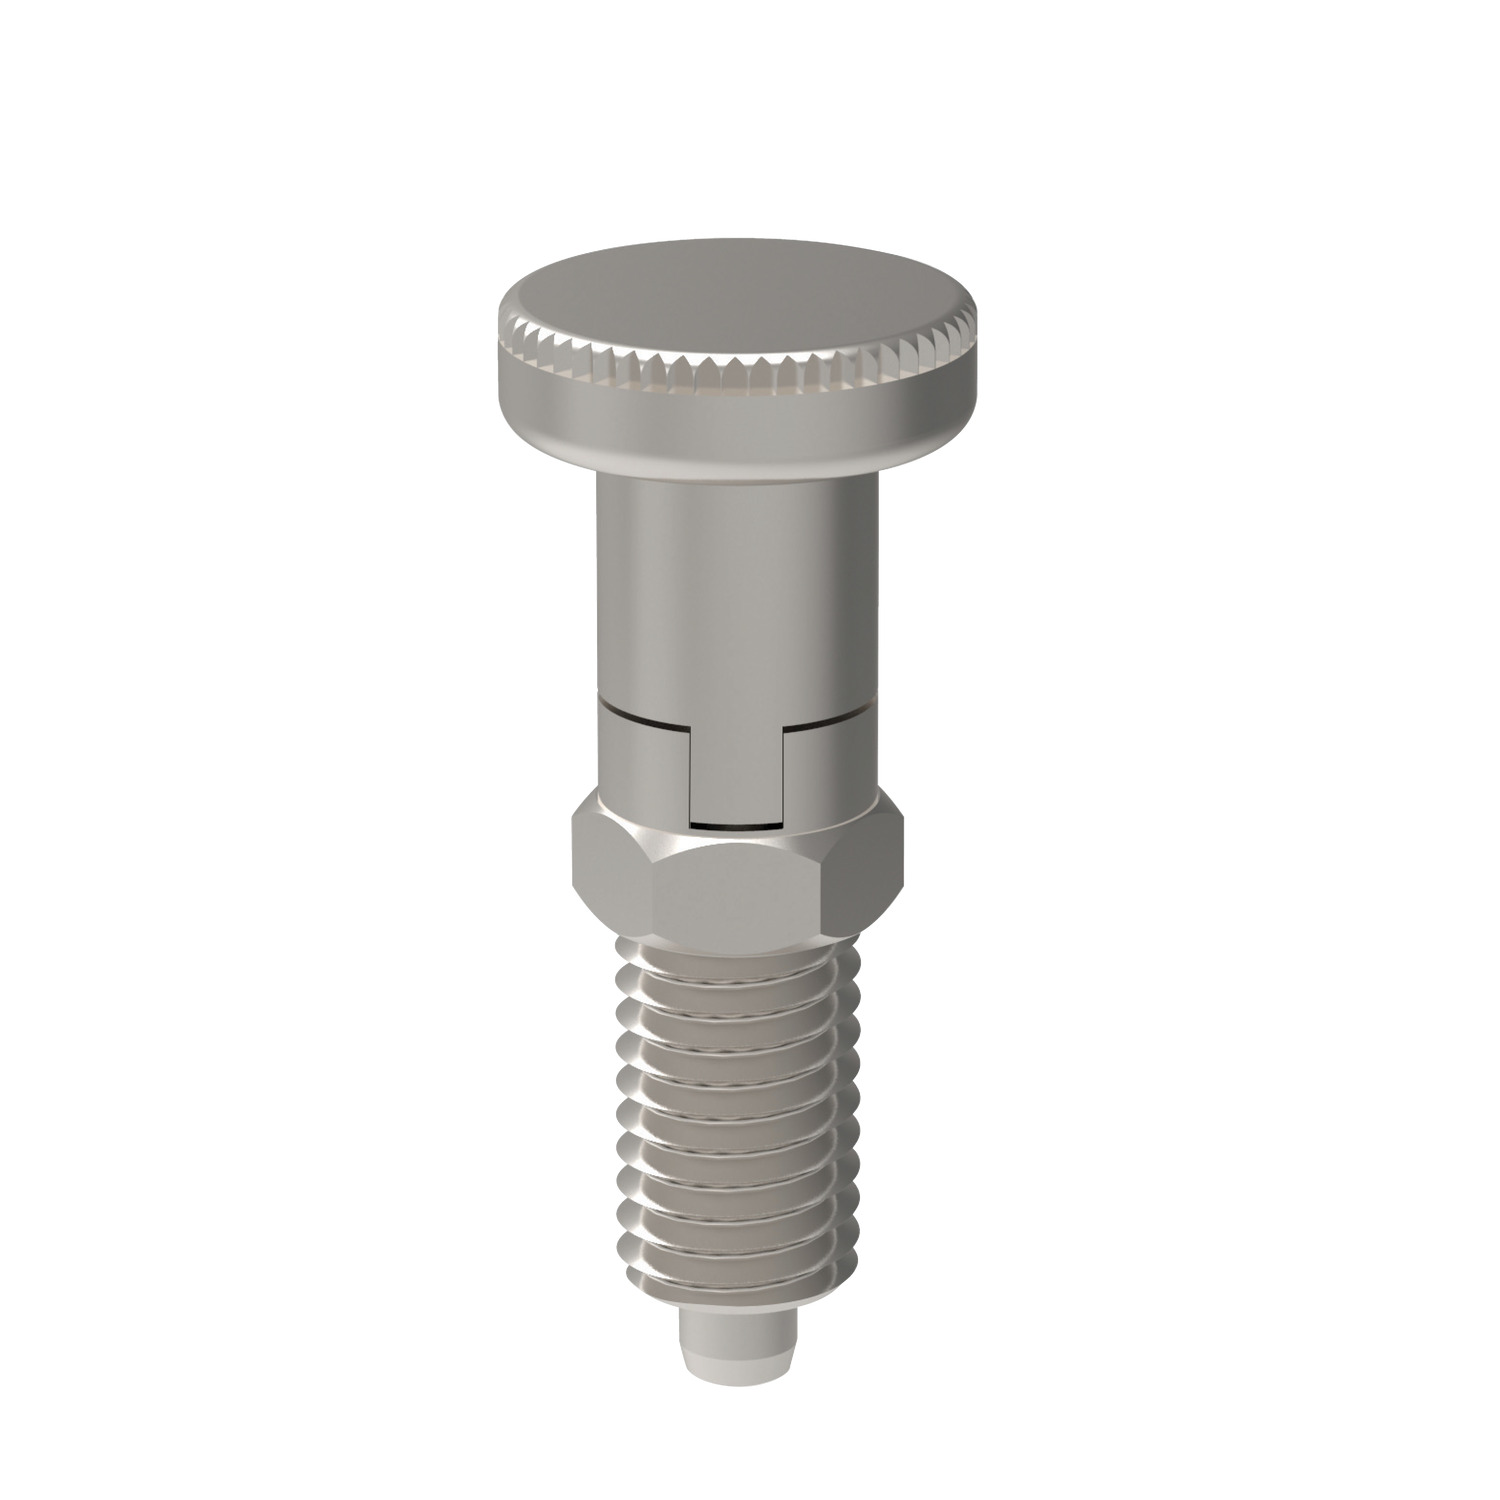 Index Plunger - Pull Grip Complete stainless steel construction designed with specific demands of food processing, pharmaceutical and water treatment industries in mind. This specific index plunger range comes with a locking mechanism.